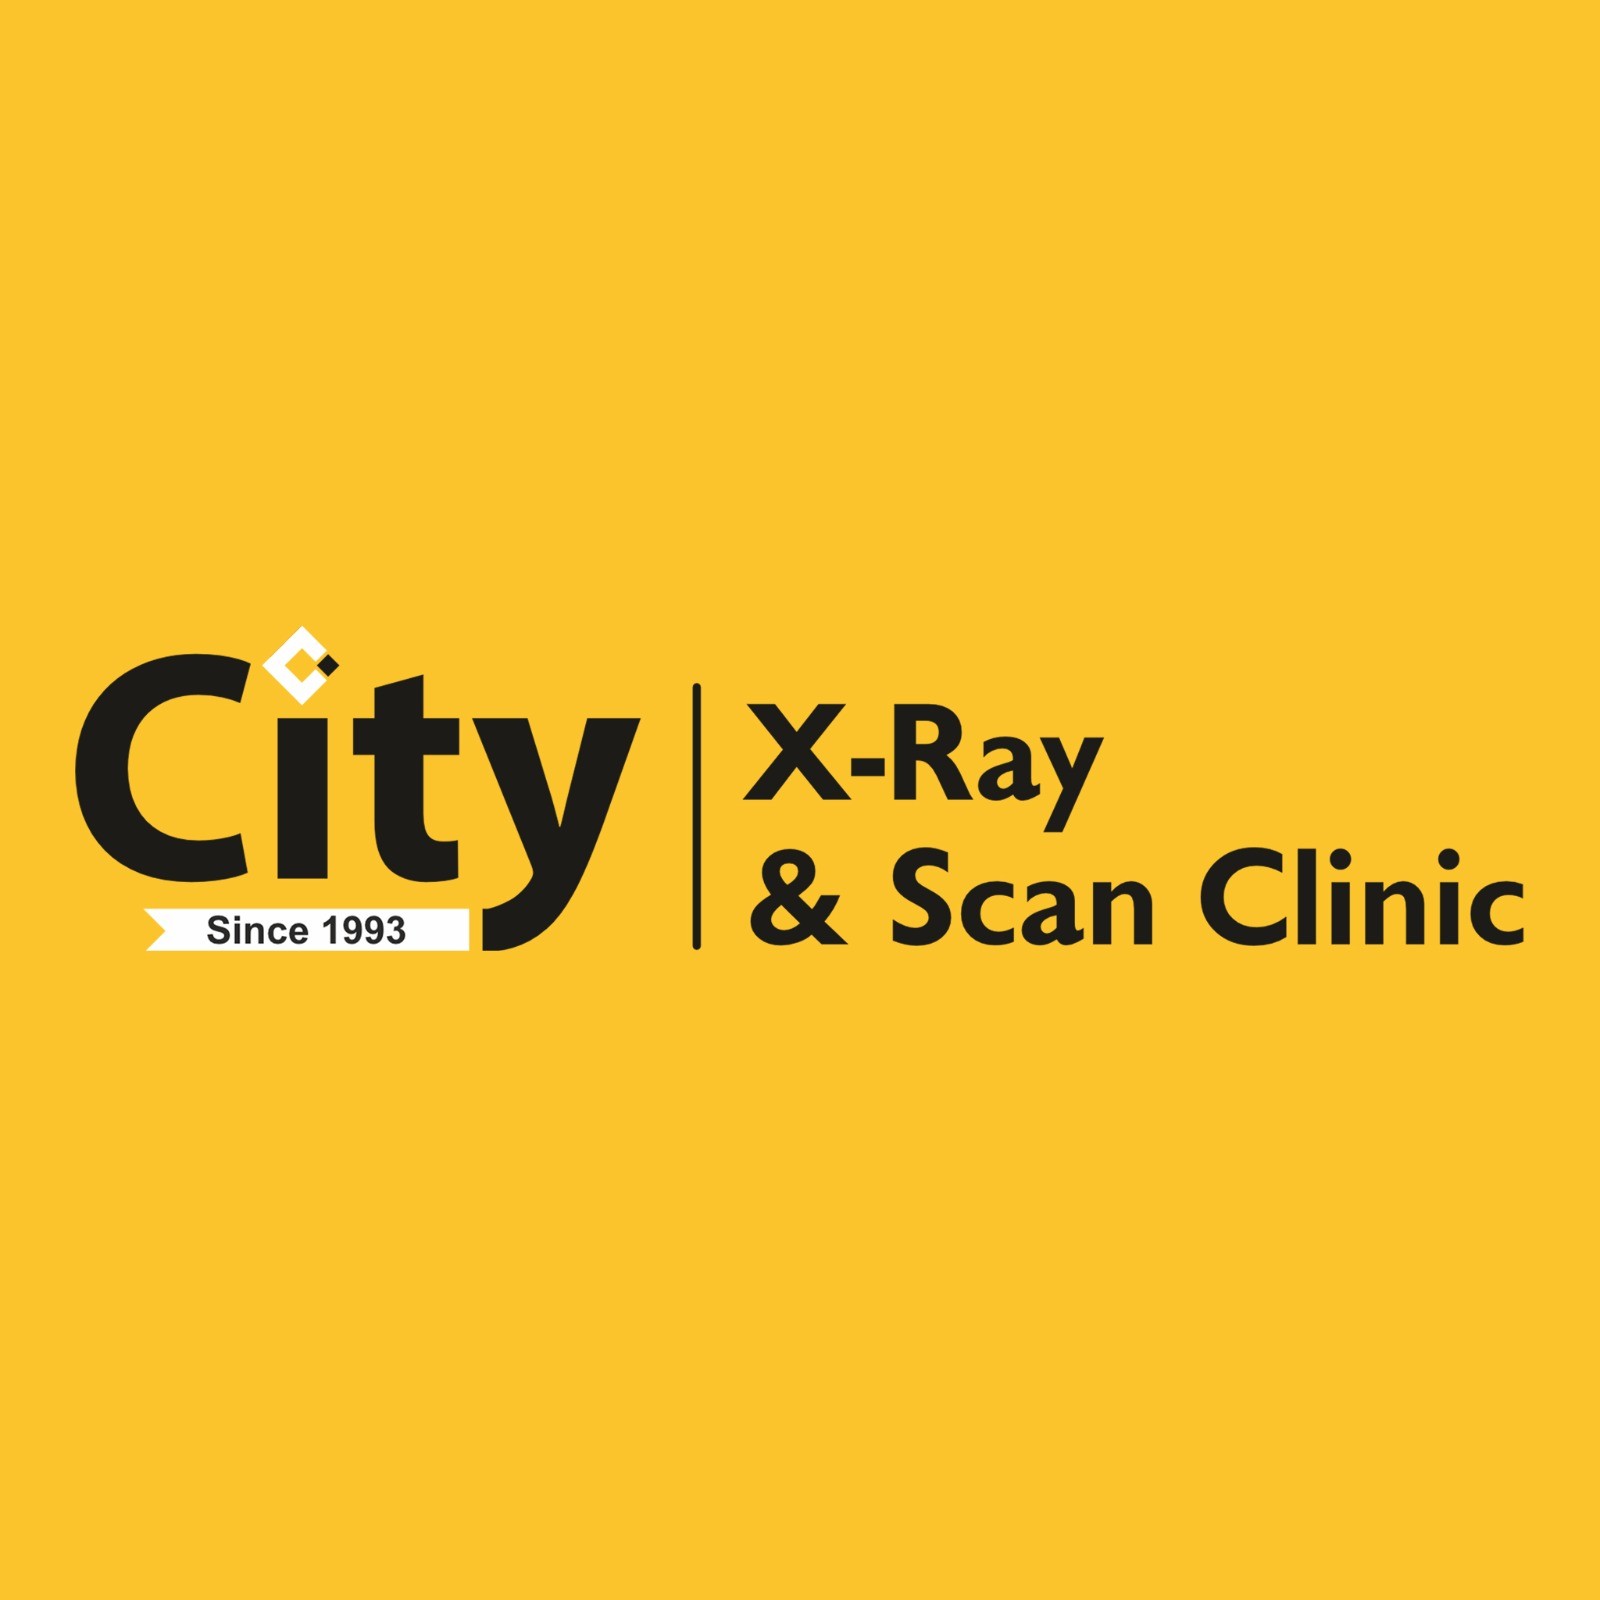 Blood Related Test, CT Scan, Sonography, X-Ray, Cardiologist; Exp: More than 15 year